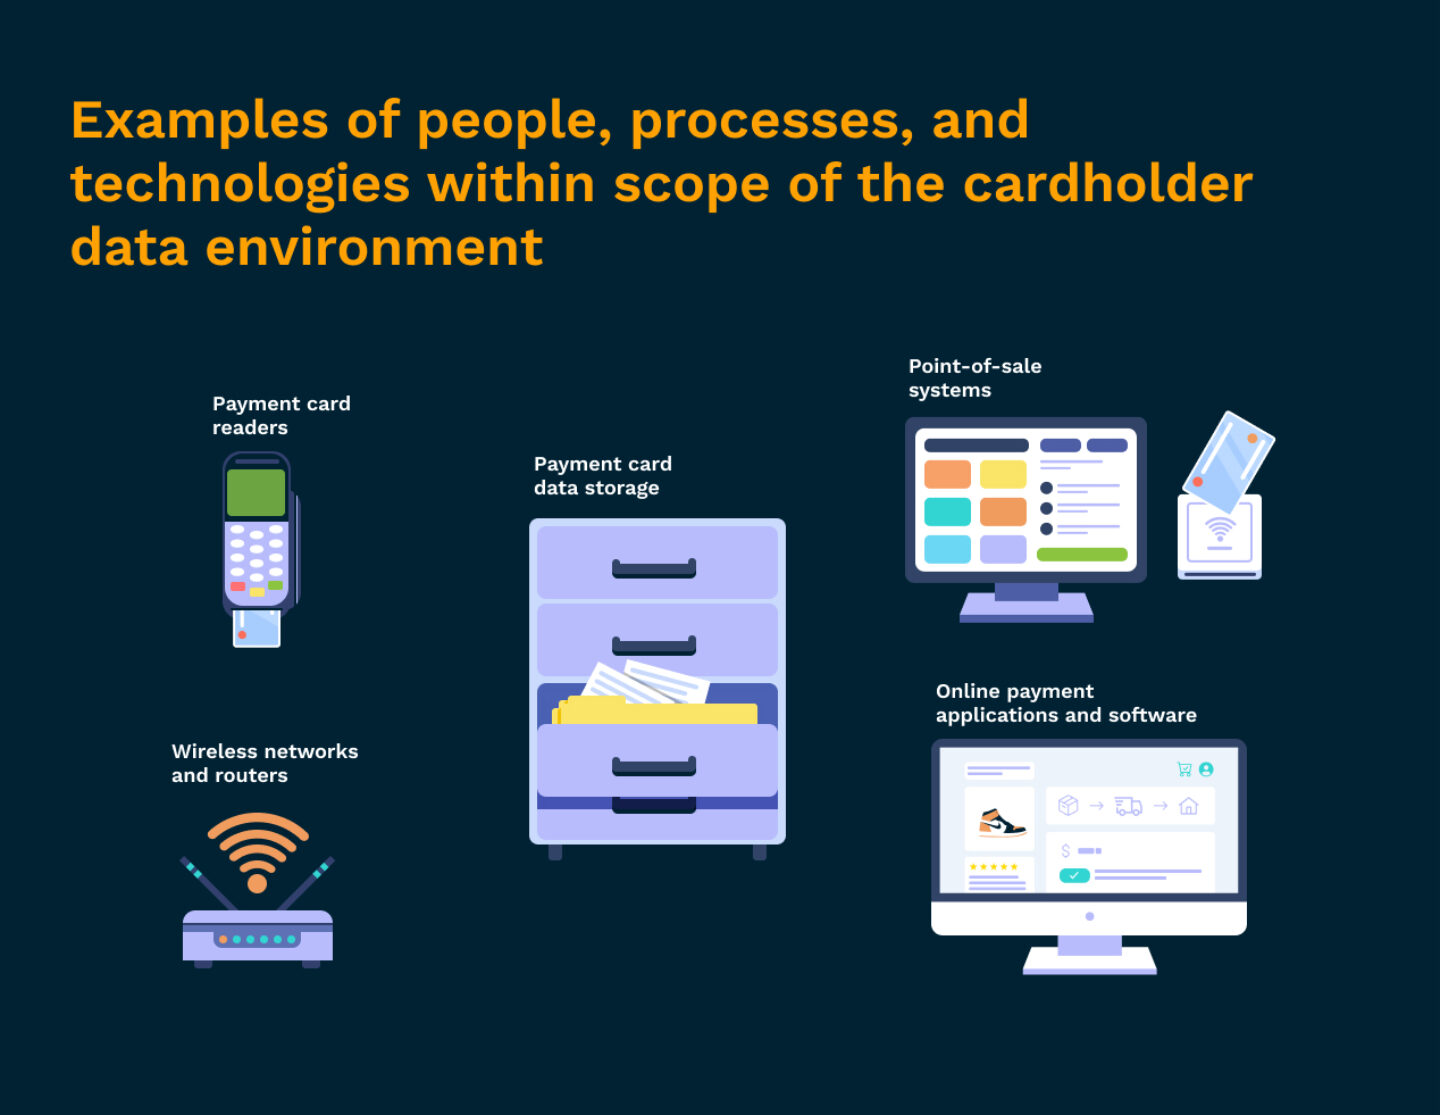 Examples of people, processes, and technologies within scope of the cardholder data environment